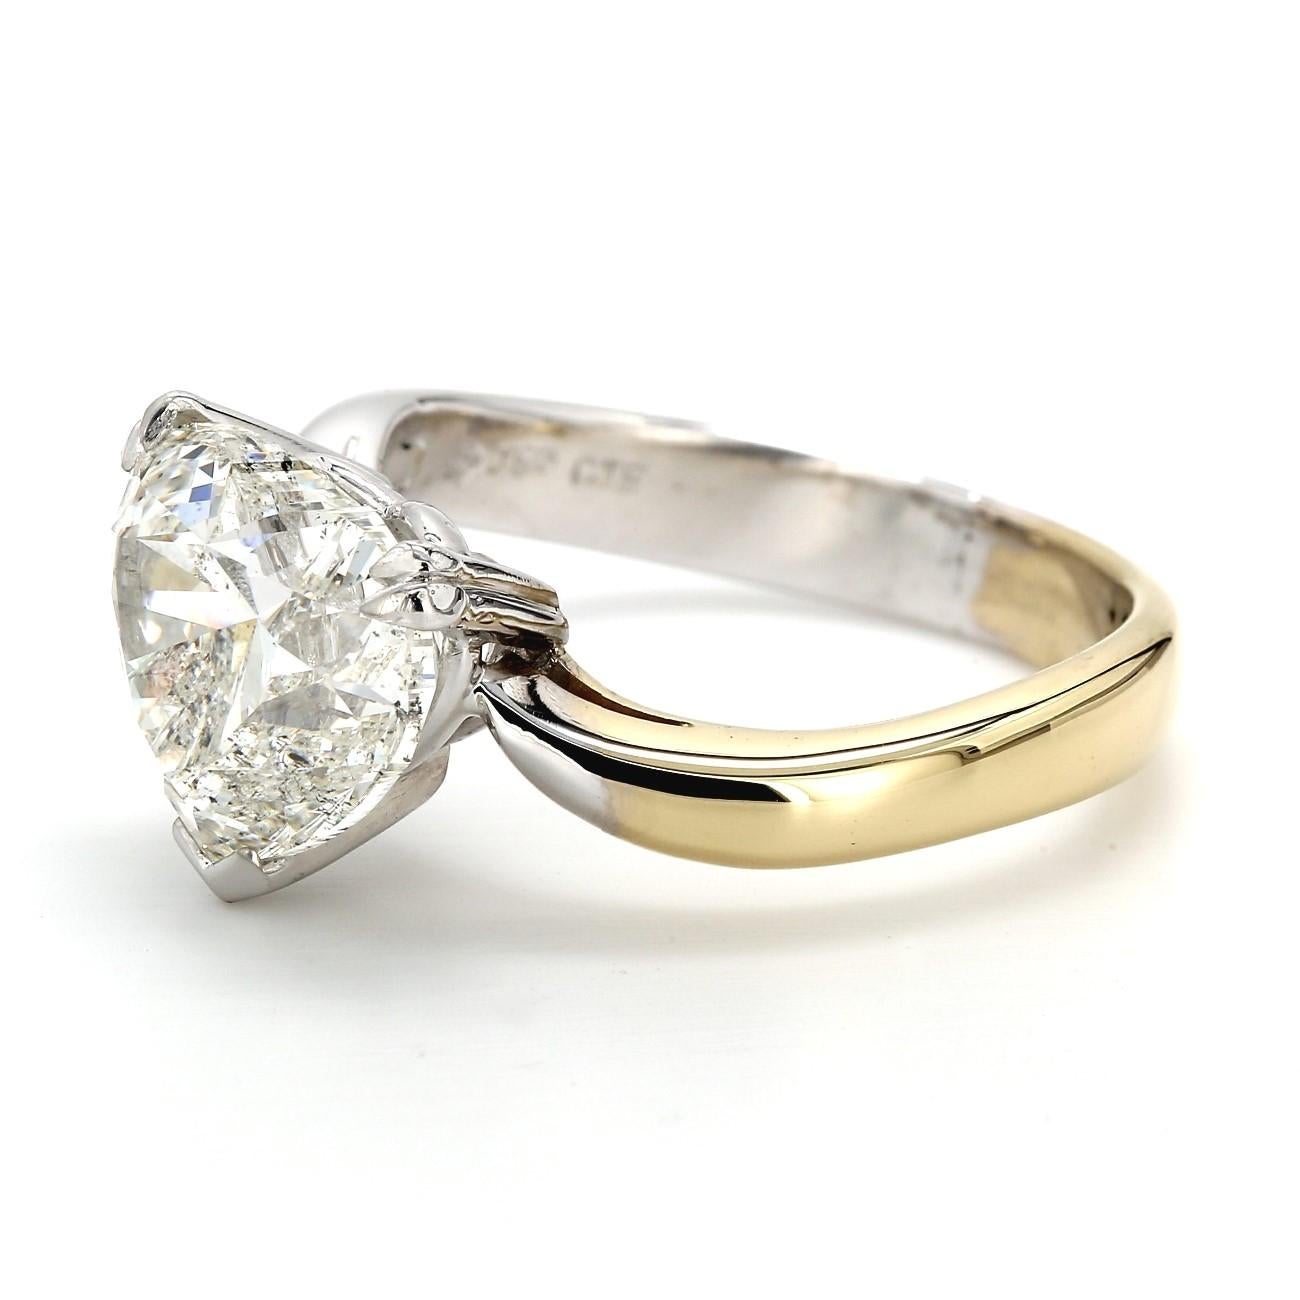 Solitaire ring in 18K two-tone with prong set GIA certified J/SI2 heart shape diamond center. D5.02ct.